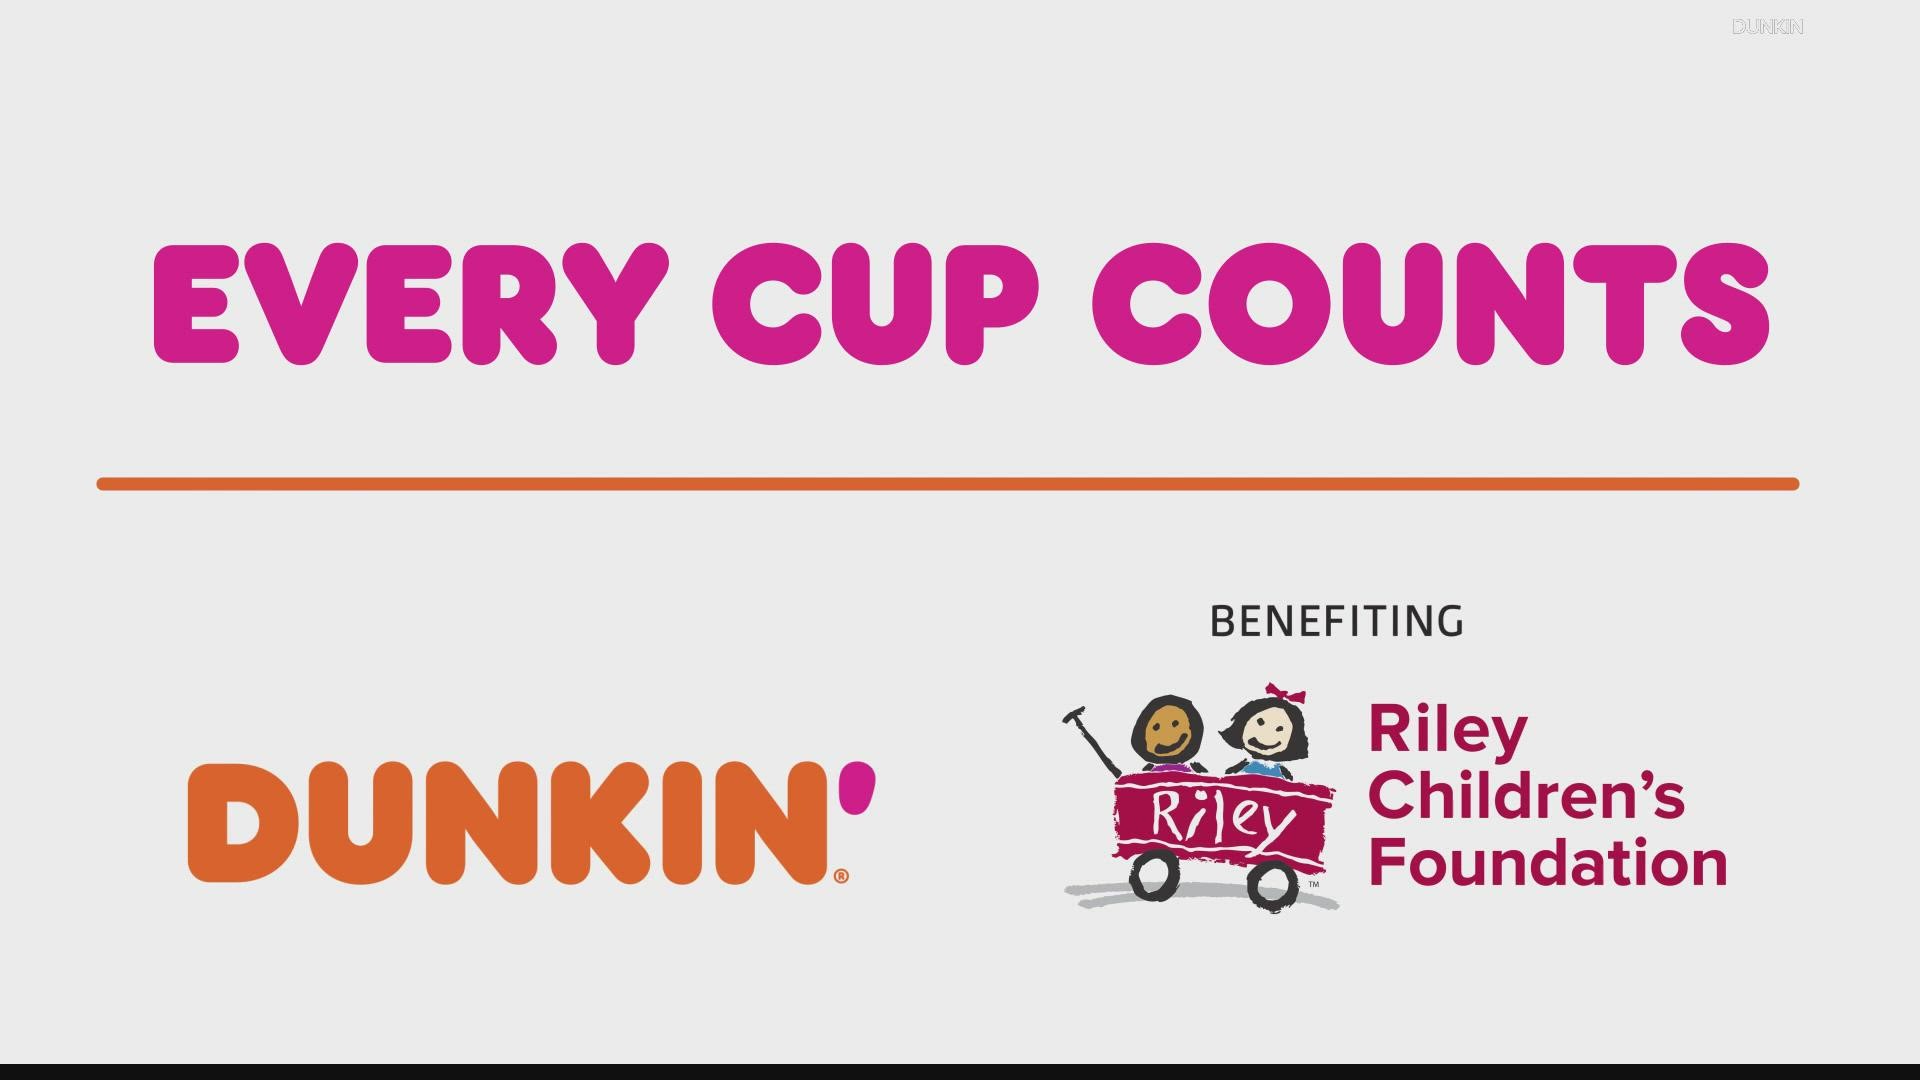 All 30 Indianapolis-area Dunkin' locations will donate $1 to Riley Children's Foundation for every large or extra large hot coffee sold on Tuesday, Nov. 30.